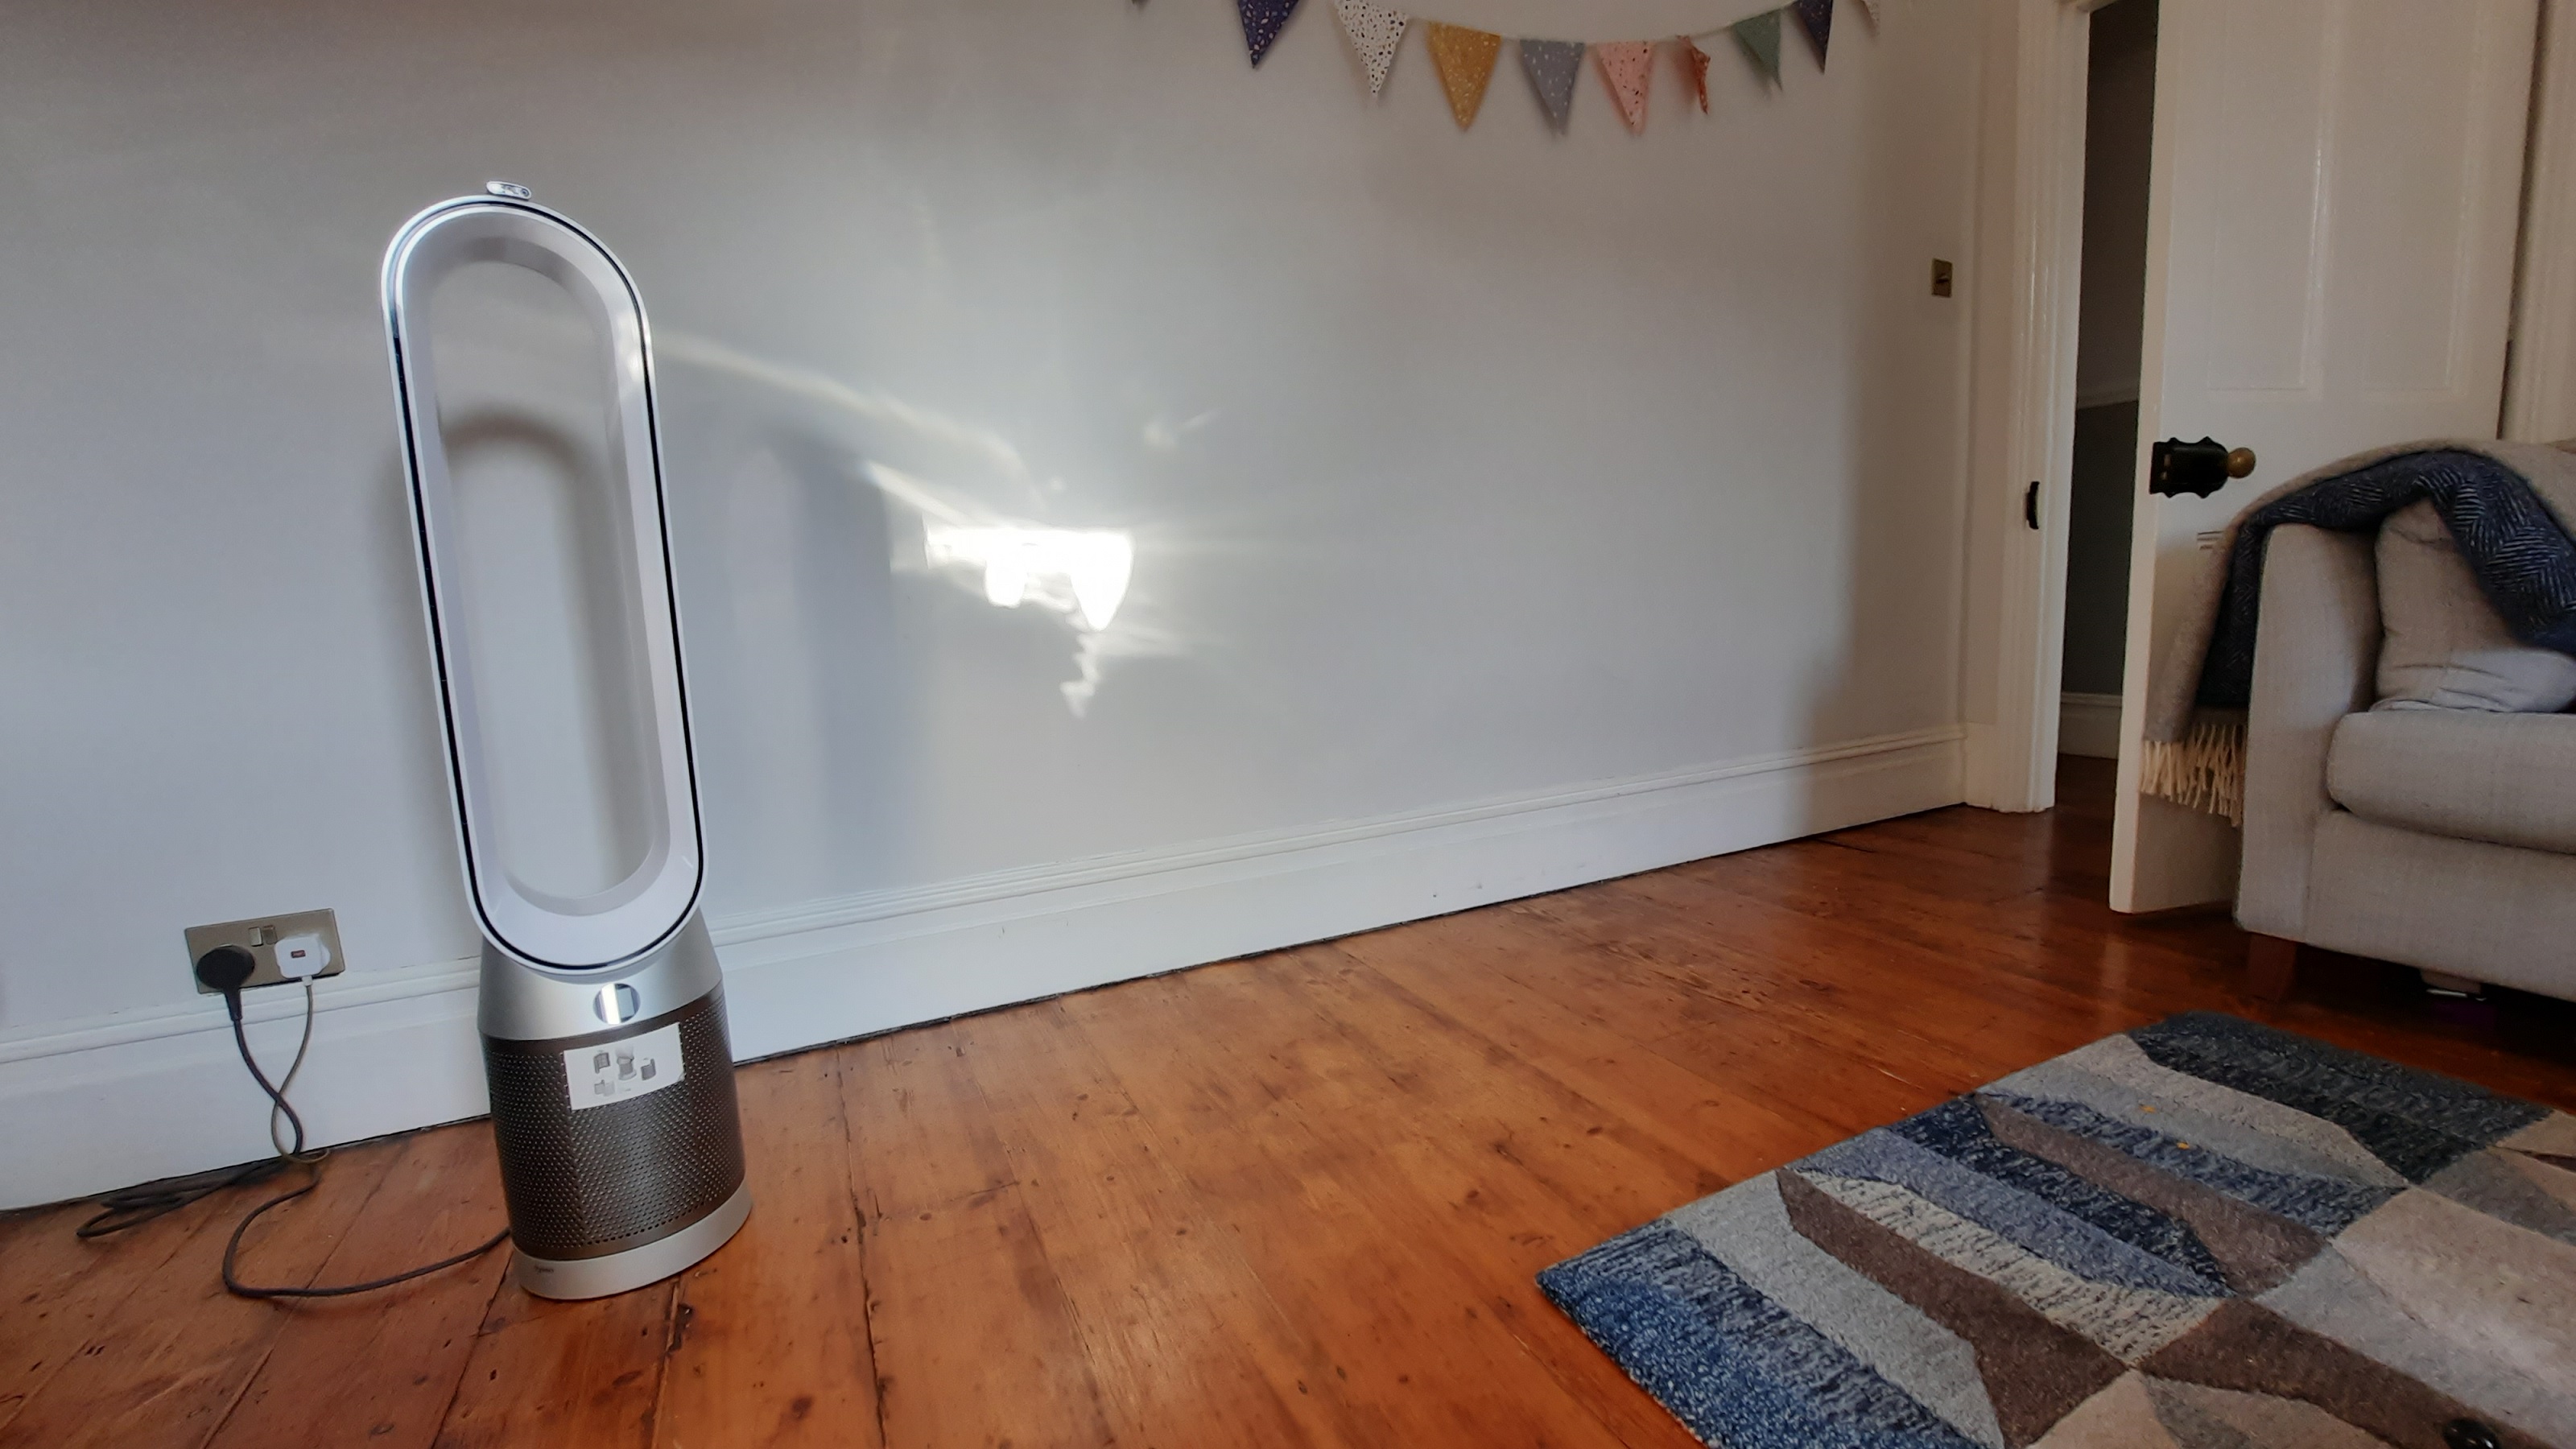 Dyson Autotract installed in front of room for review